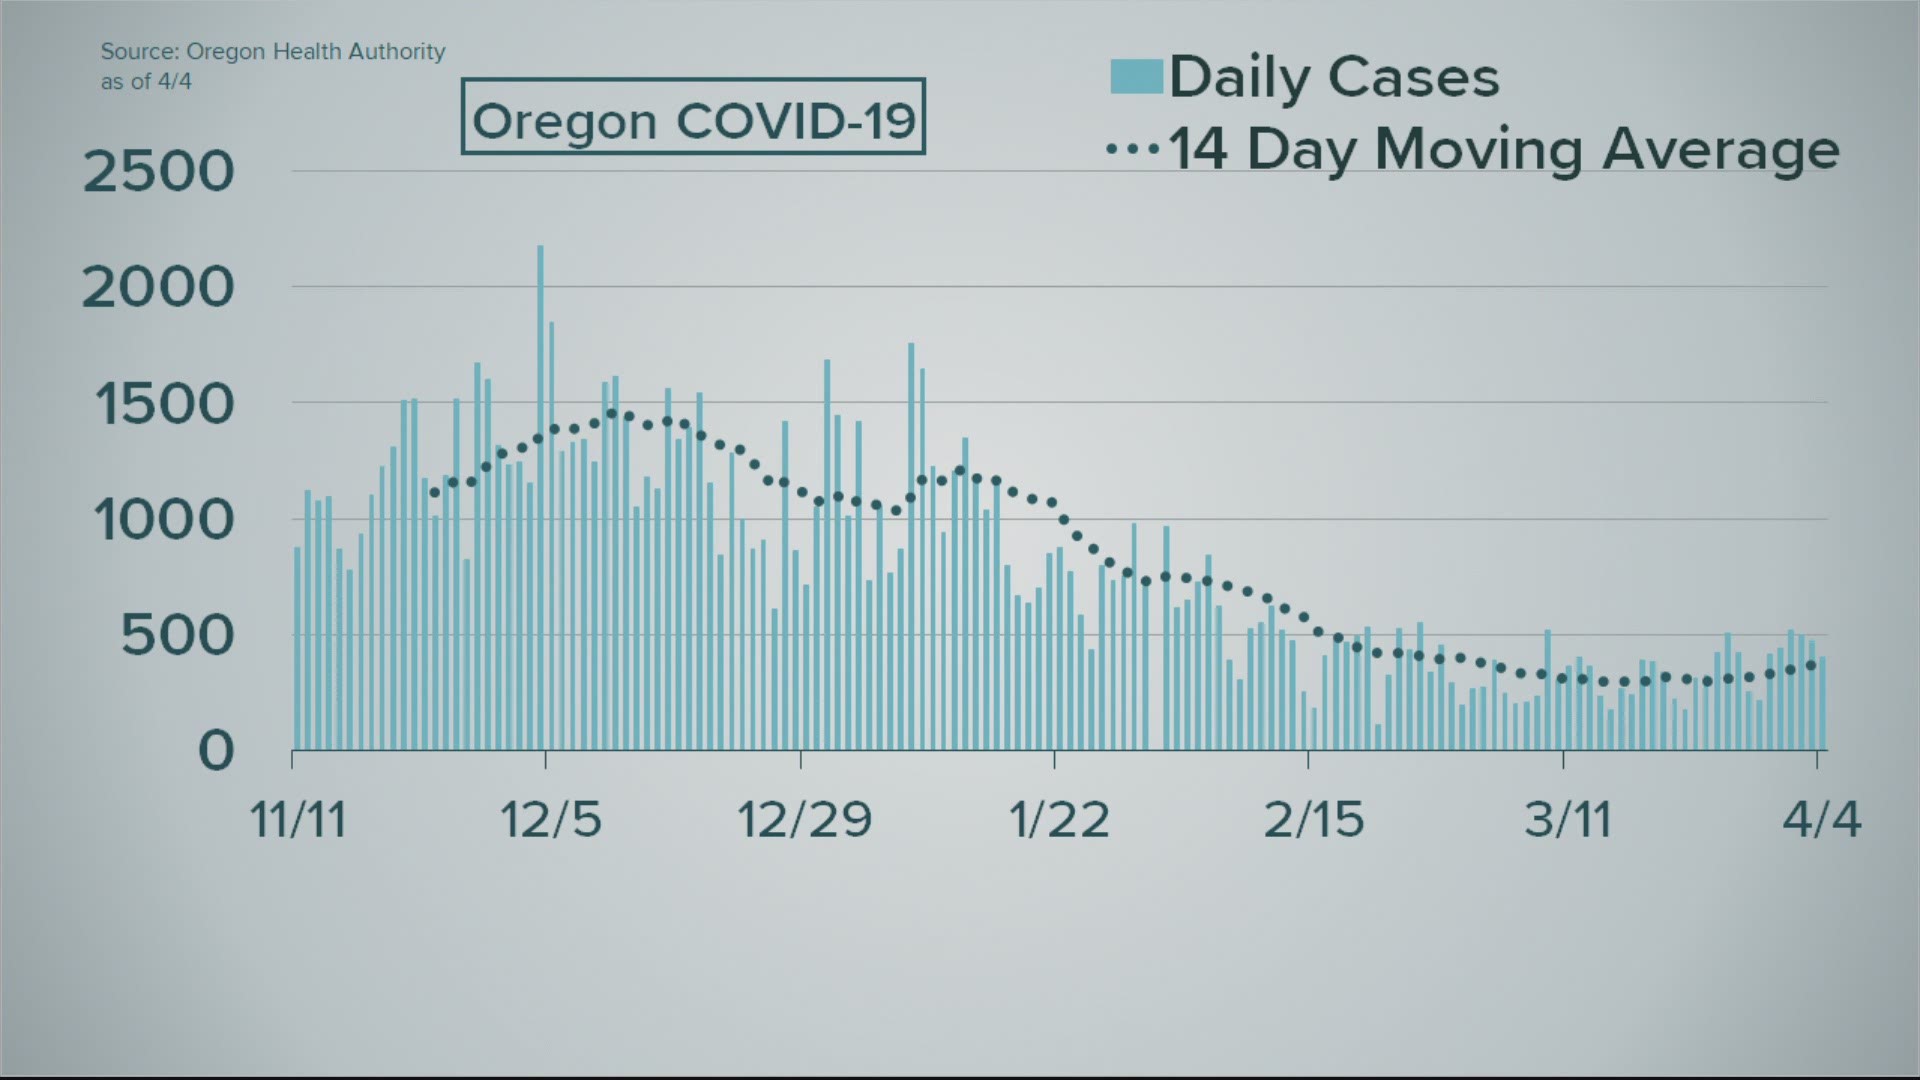 In its daily report on Sunday, the Oregon Health Authority announced 404 new confirmed and presumptive COVID-19 cases in the state.